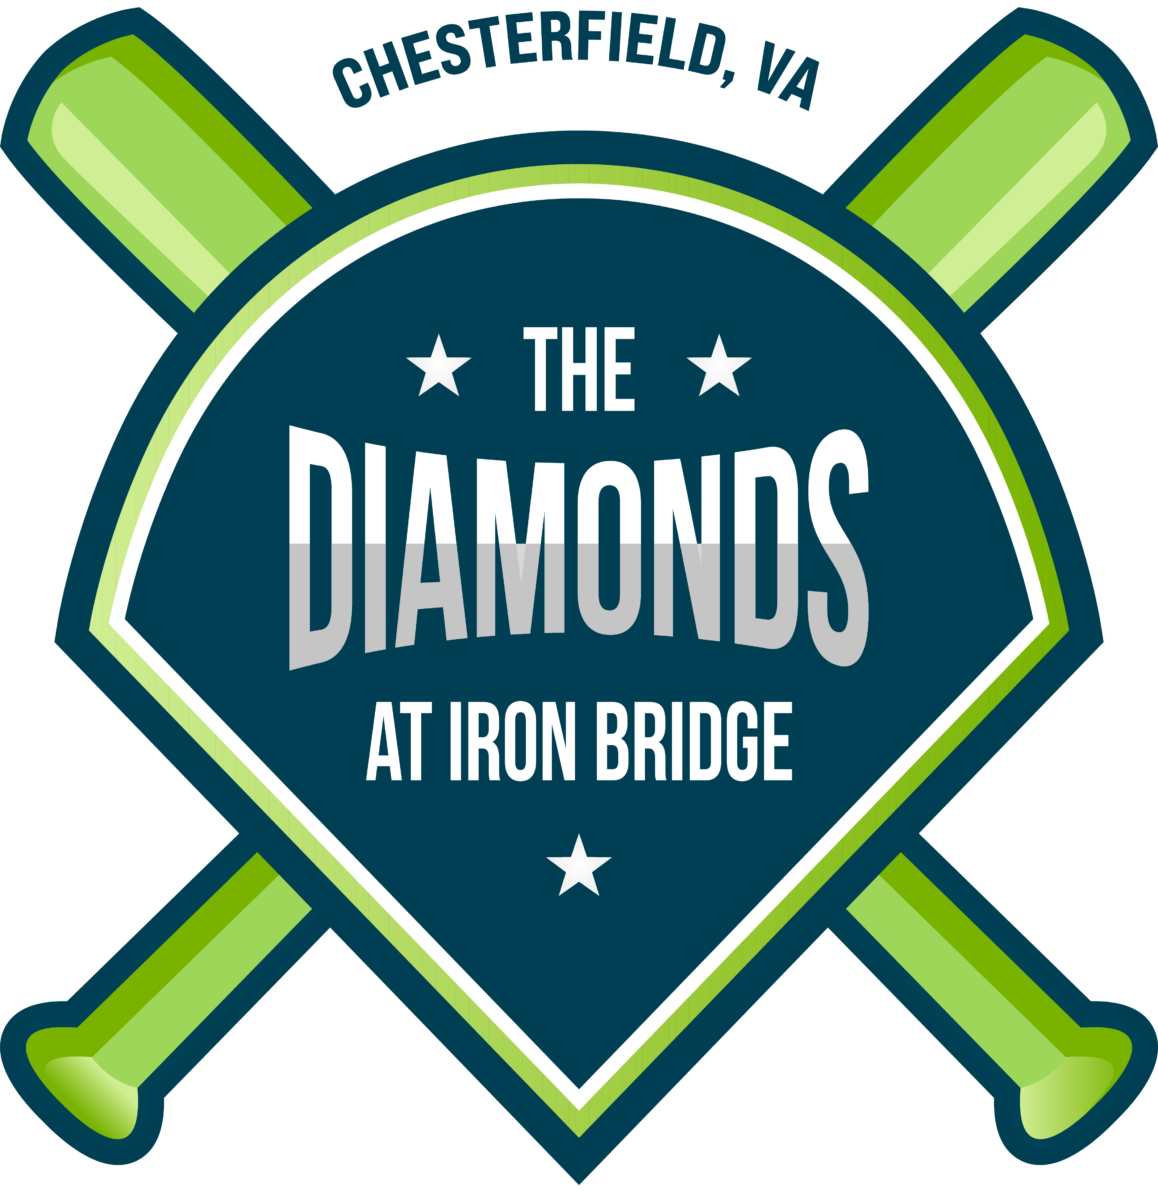 Diamonds at Iron Bridge Logo with diamond field in middle in navy blue with two green baseball bats crossing. White text that says The Diamonds at Iron Bridge.